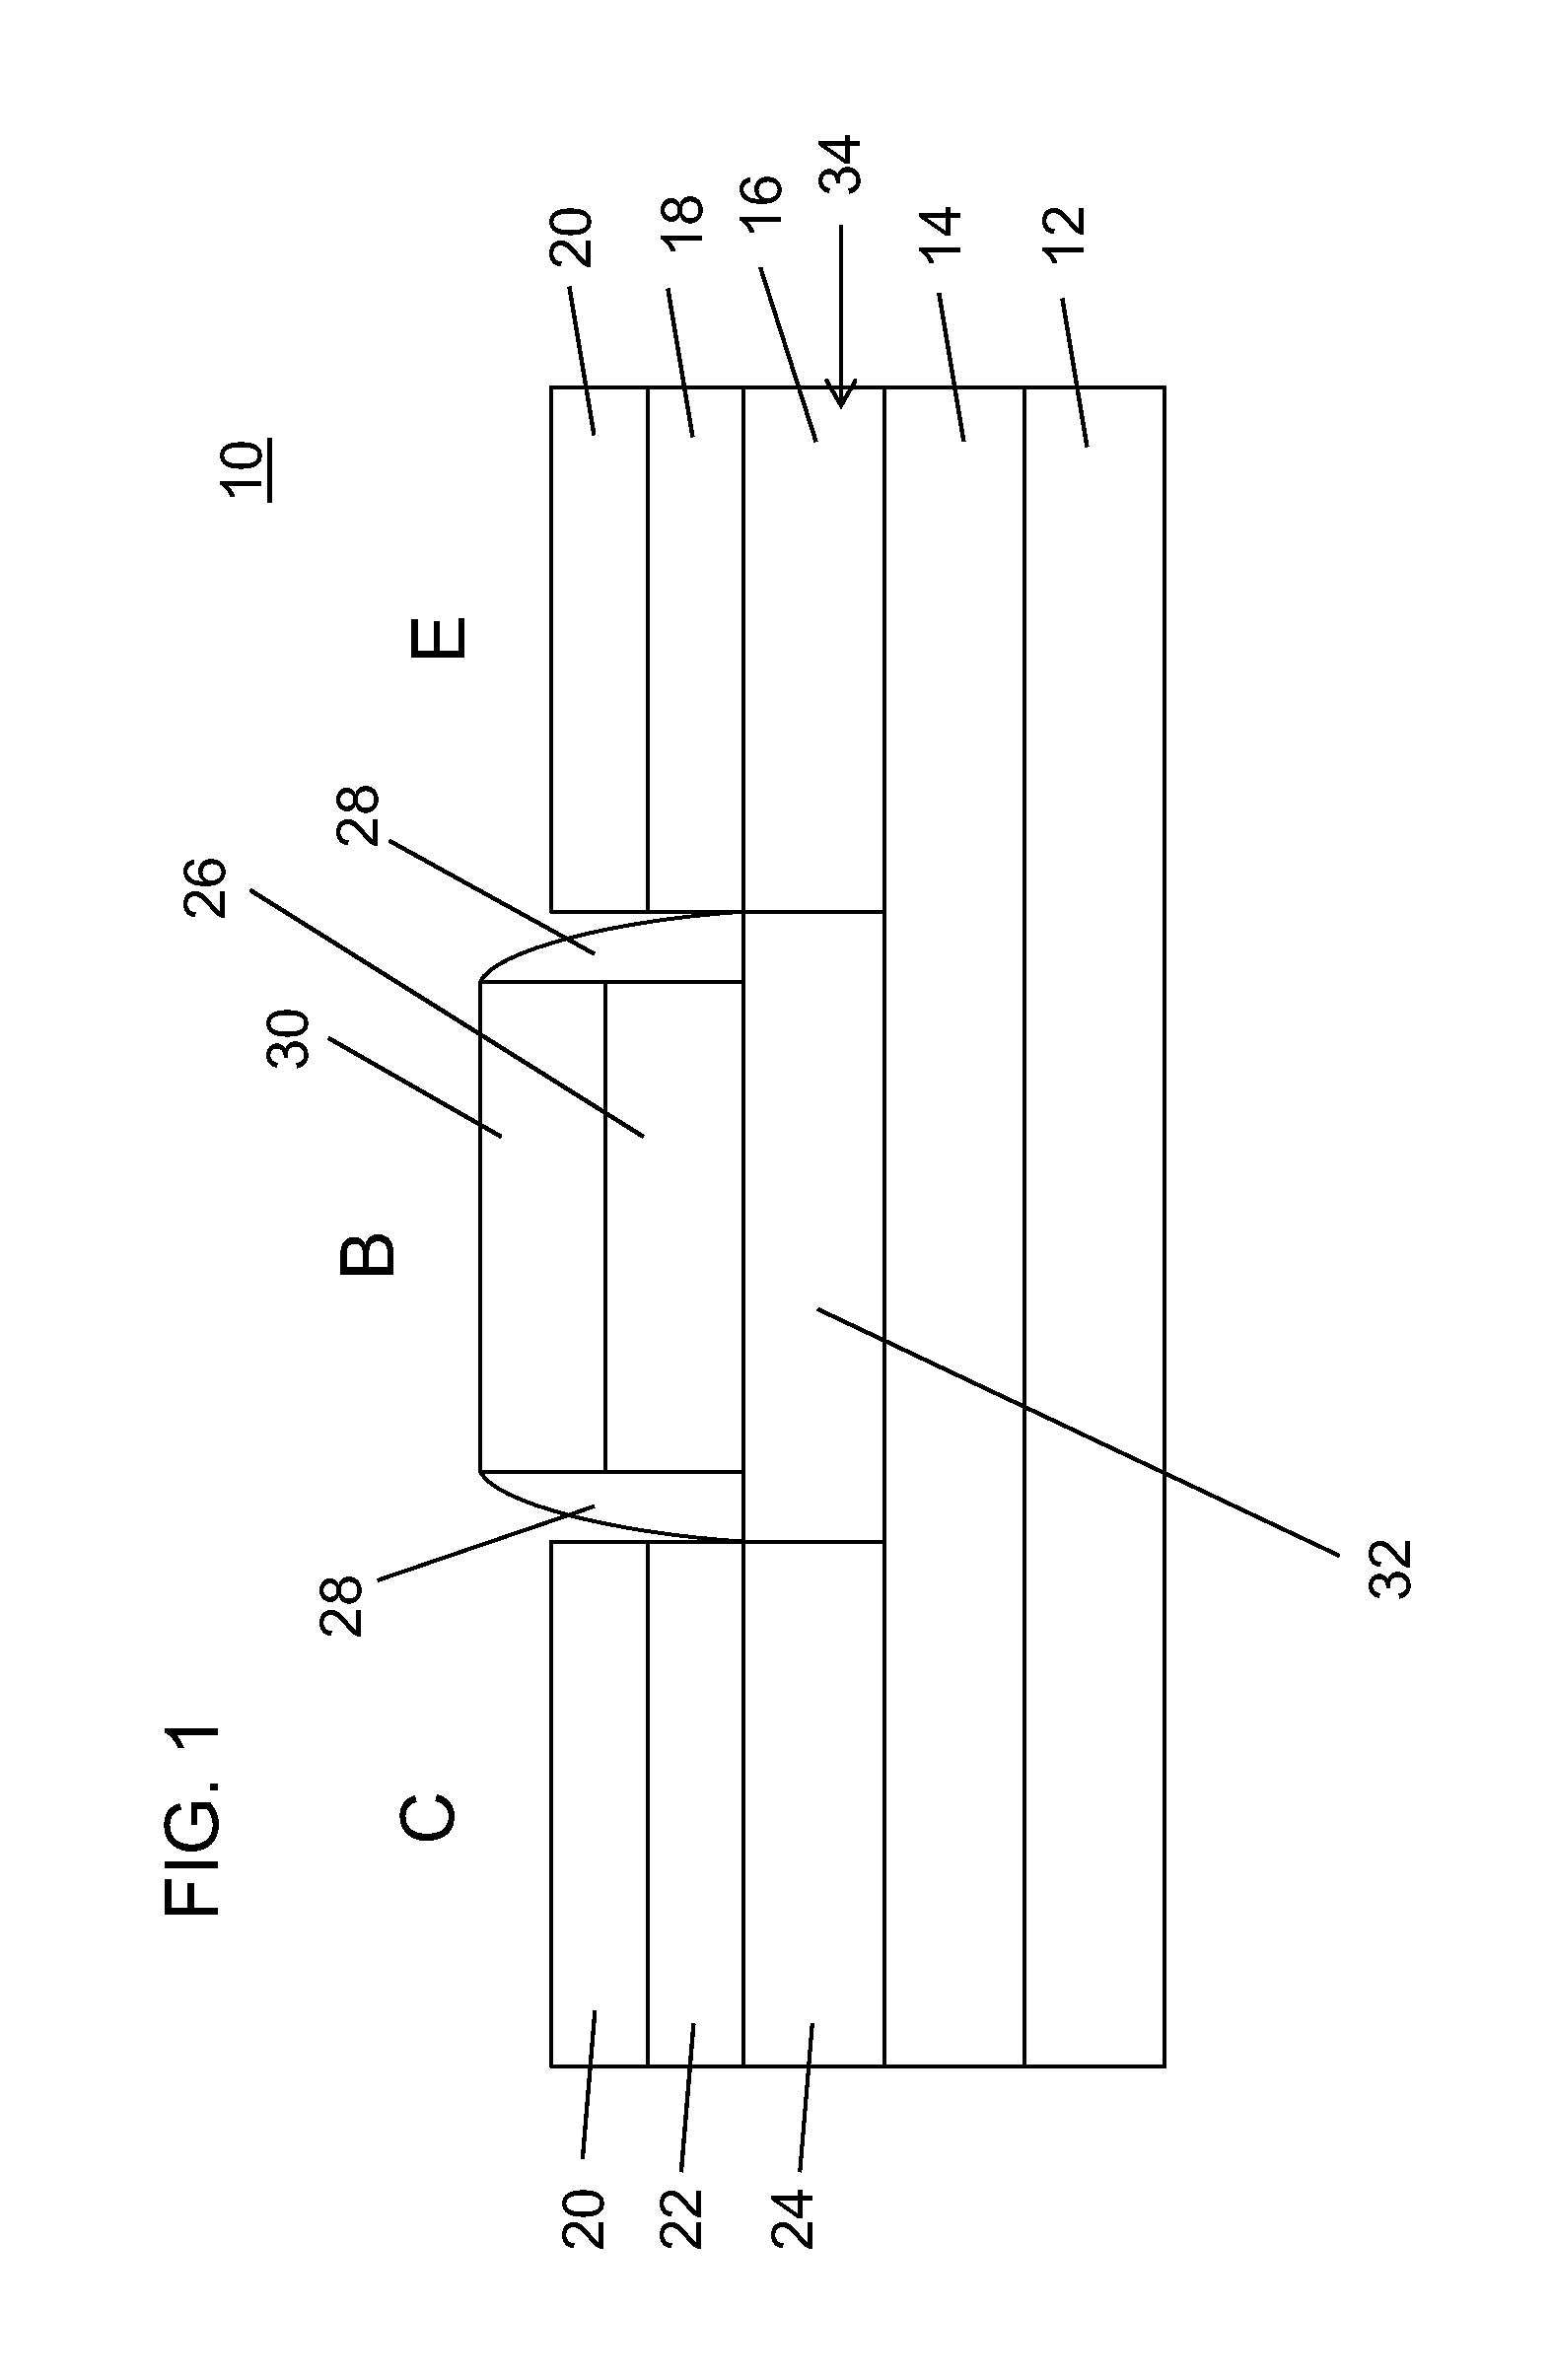 Bipolar transistor with carbon alloyed contacts